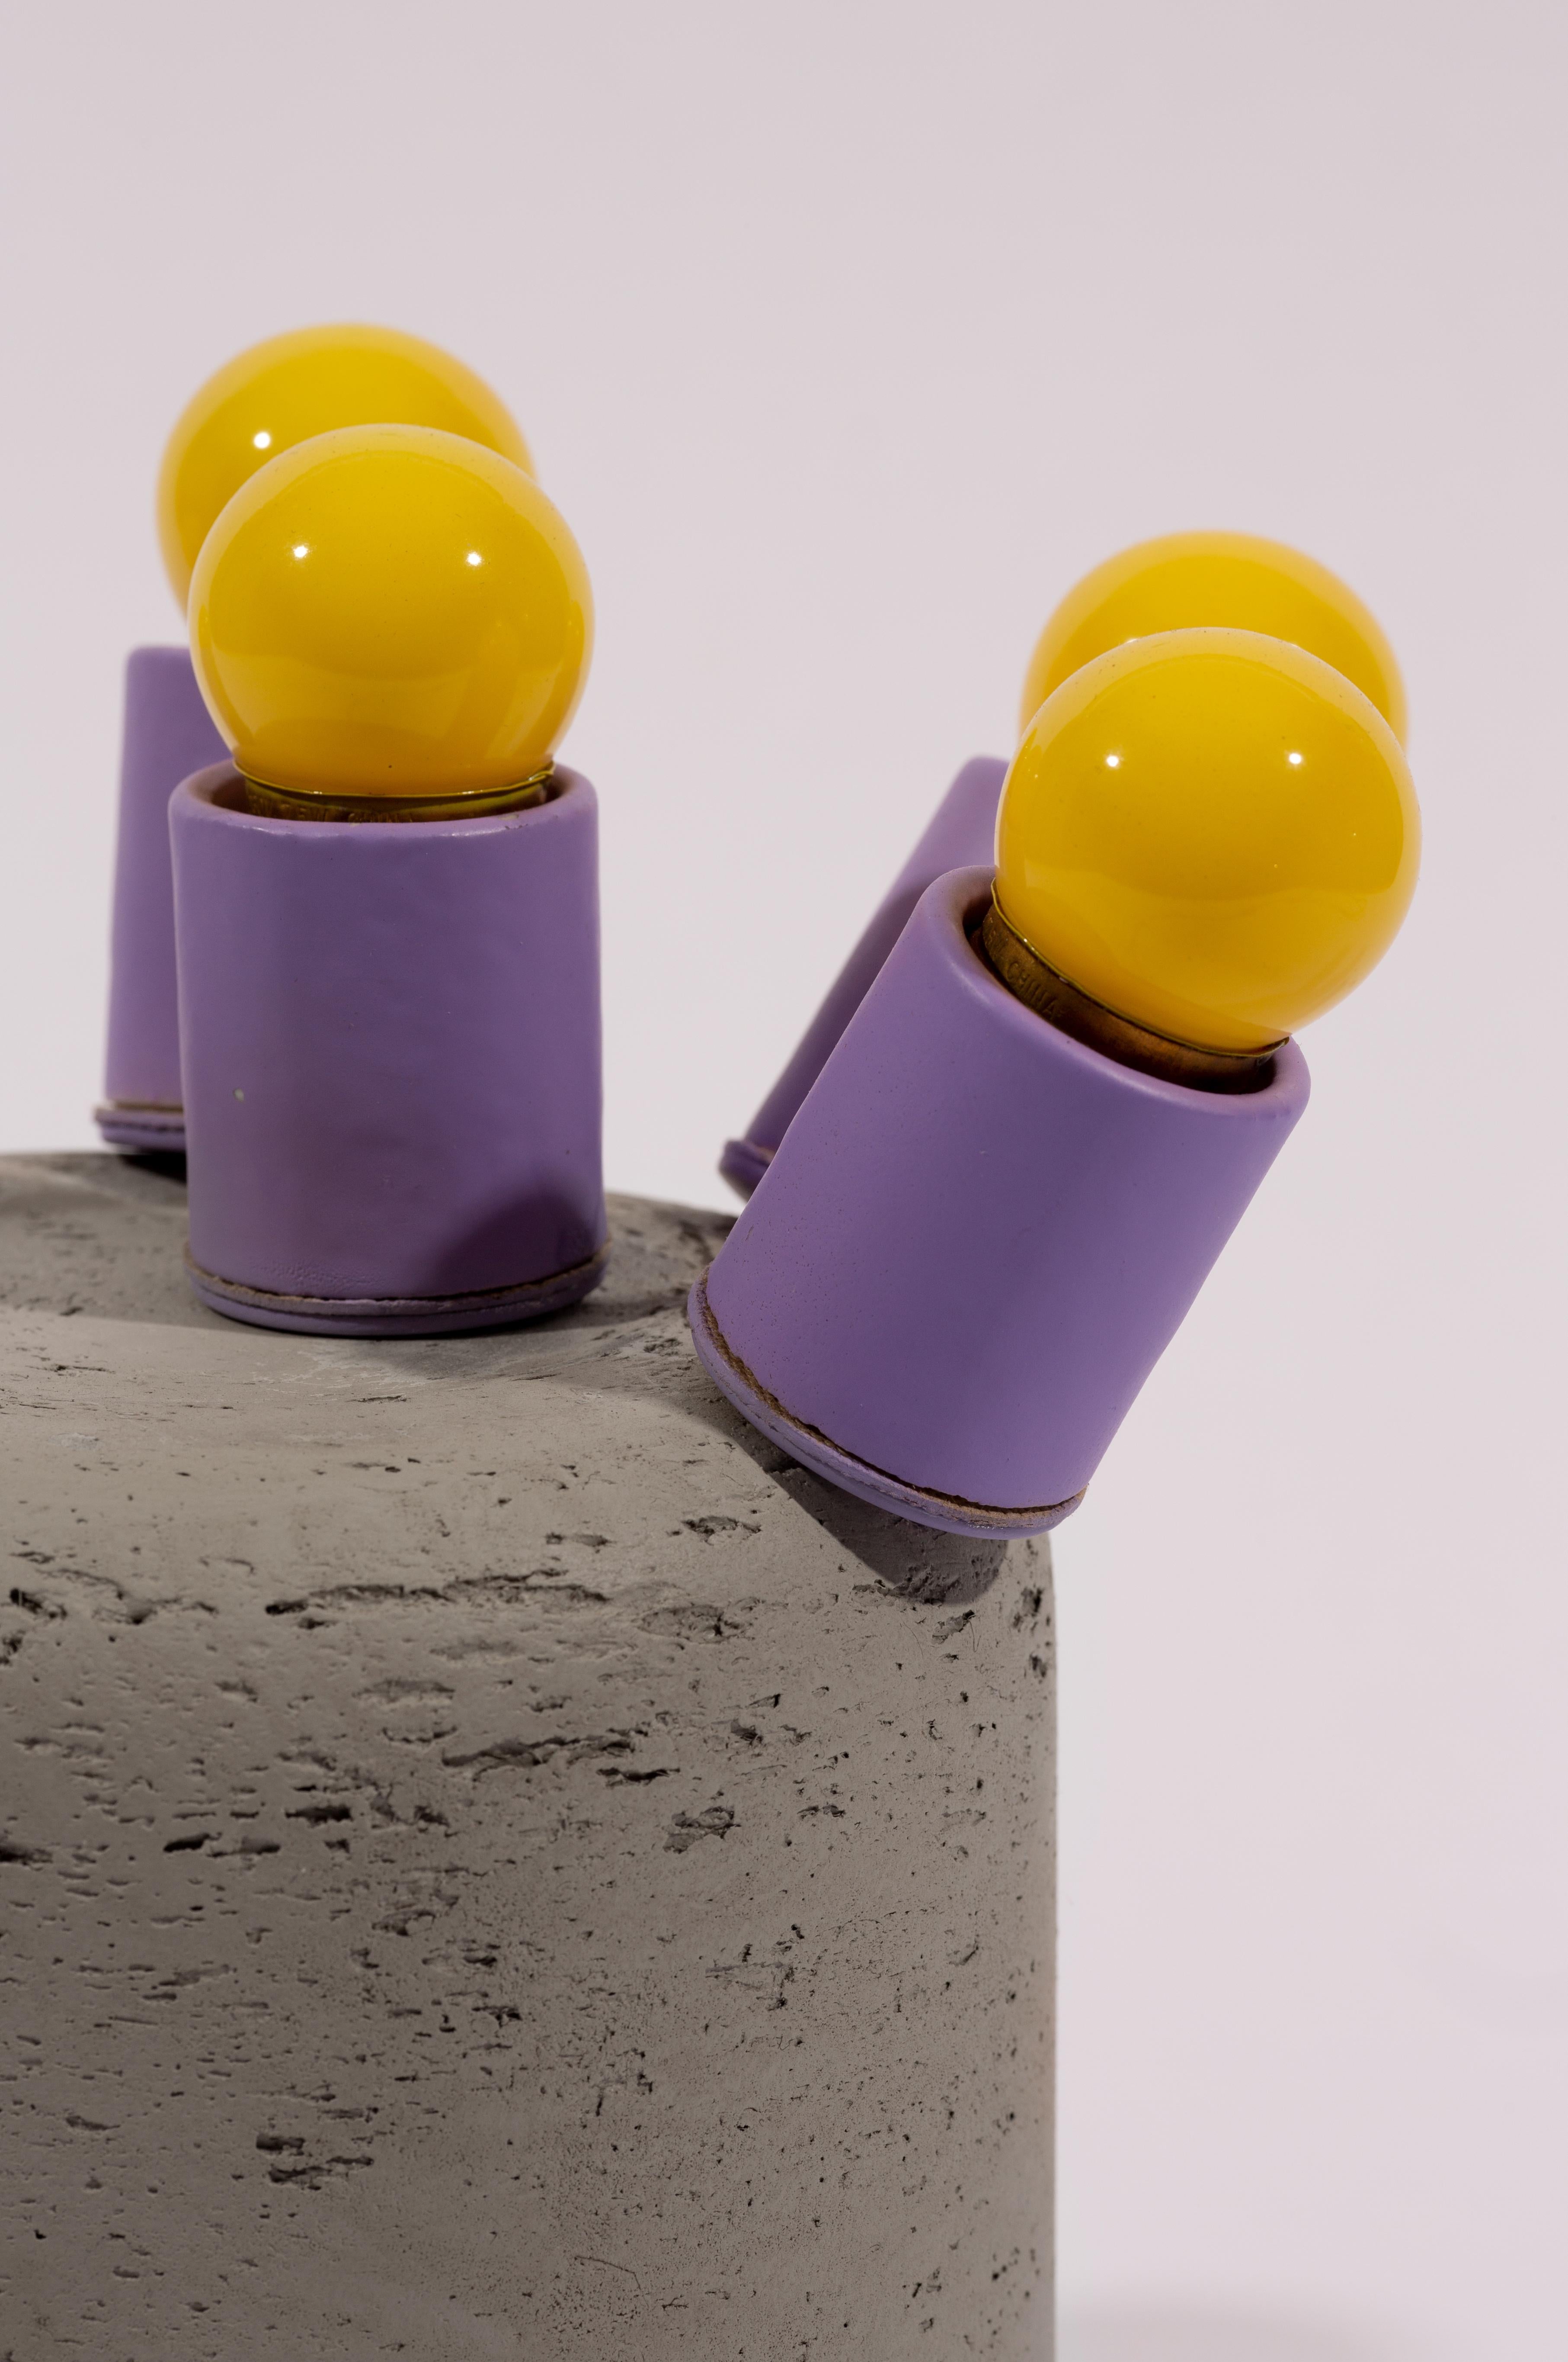 American Playful Purple and Yellow Concrete Contemporary Table Lamp by Nusprodukt